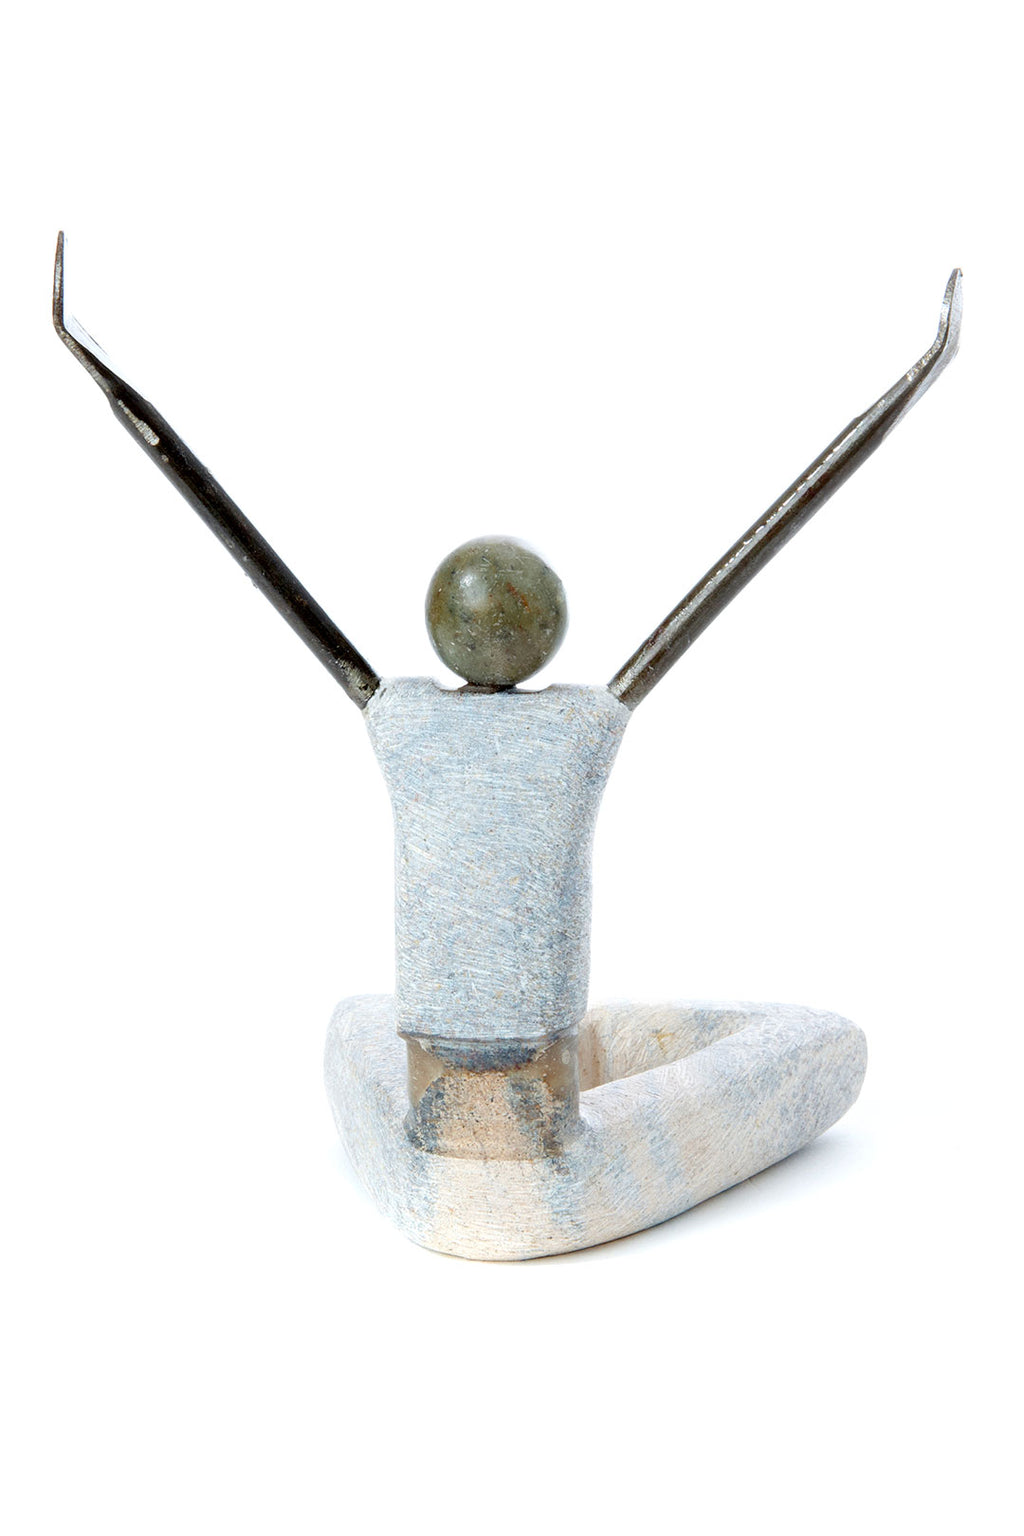 Stone and Metal Yogi Sculpture with Outstretched Arms